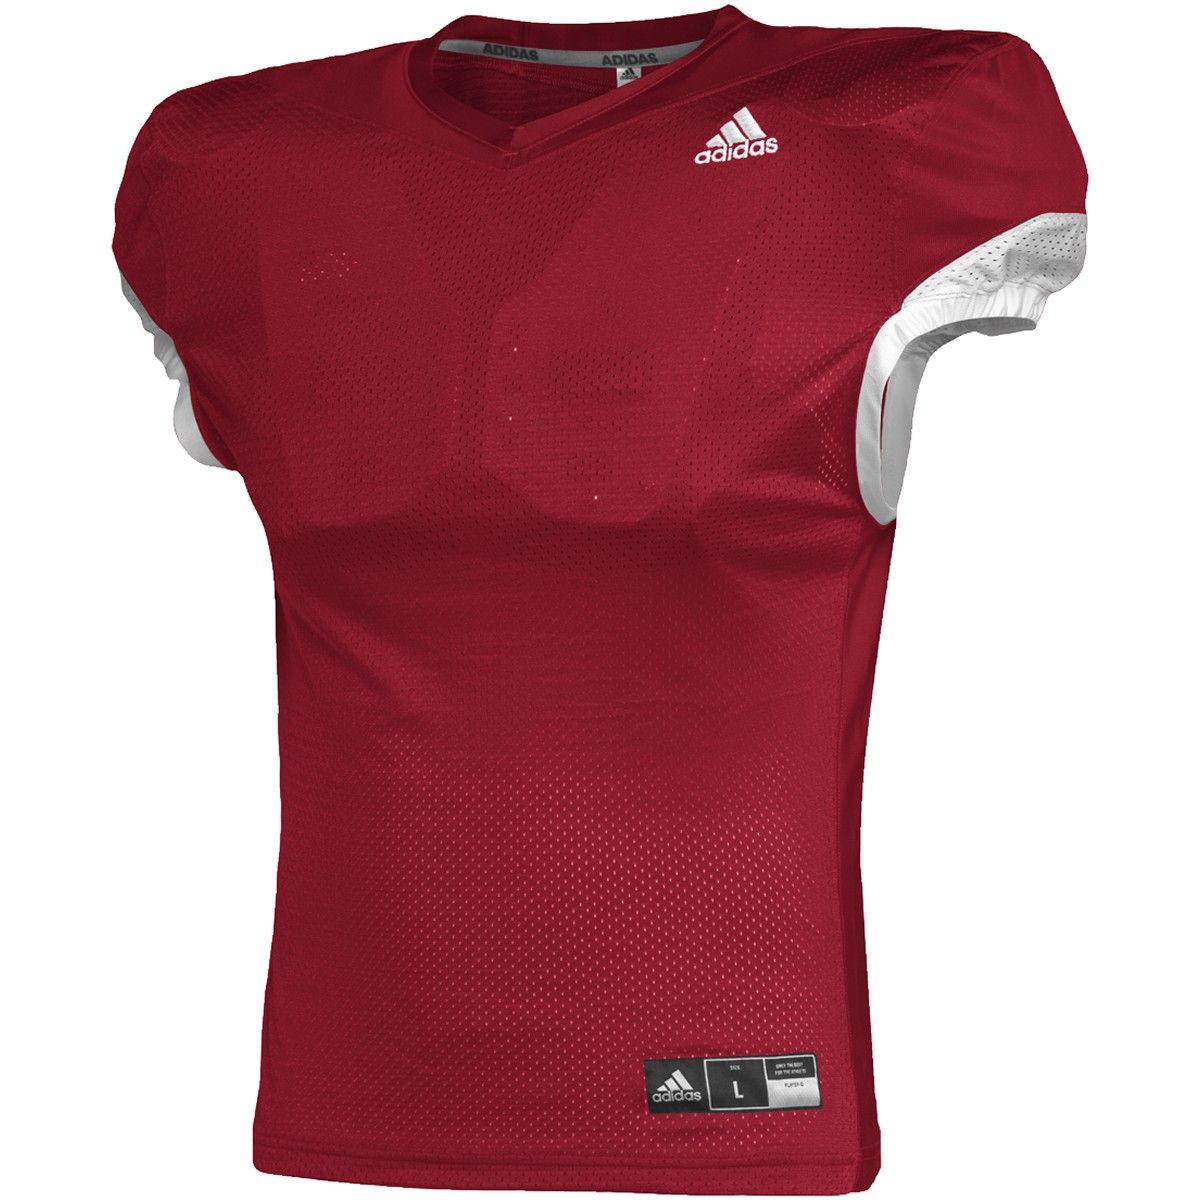 adidas Press Coverage 2.0 Men's Football Jersey | Stay Cool and Under Pressure RevUpSports.com | H63668